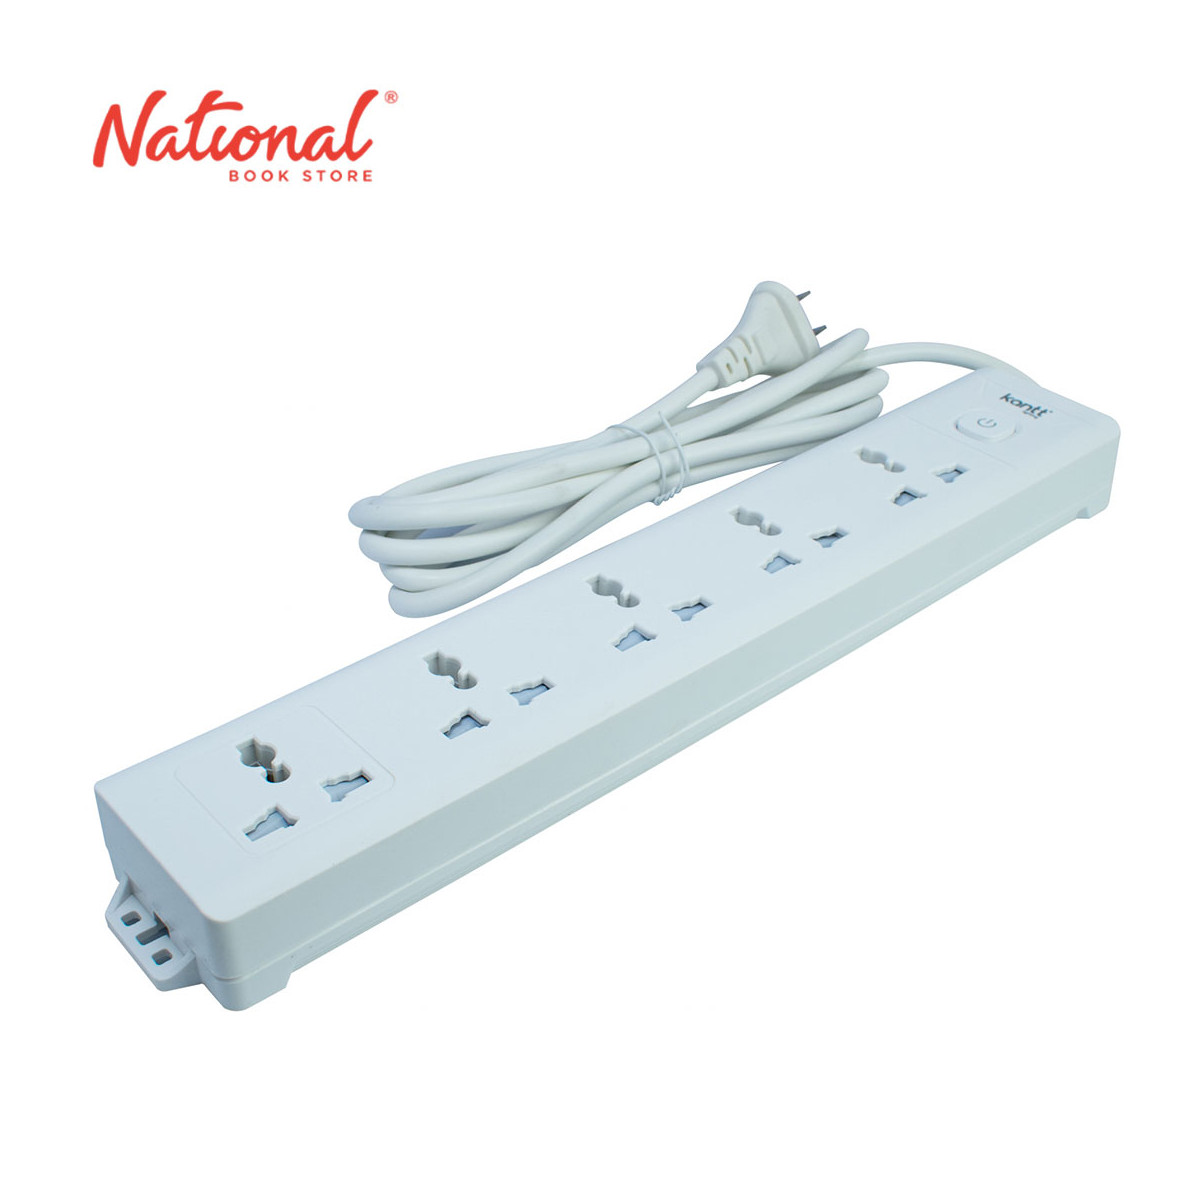 Kantt Extension Cord KAW-ECUO5 Universal 2 meters, White - Home & Office Equipment